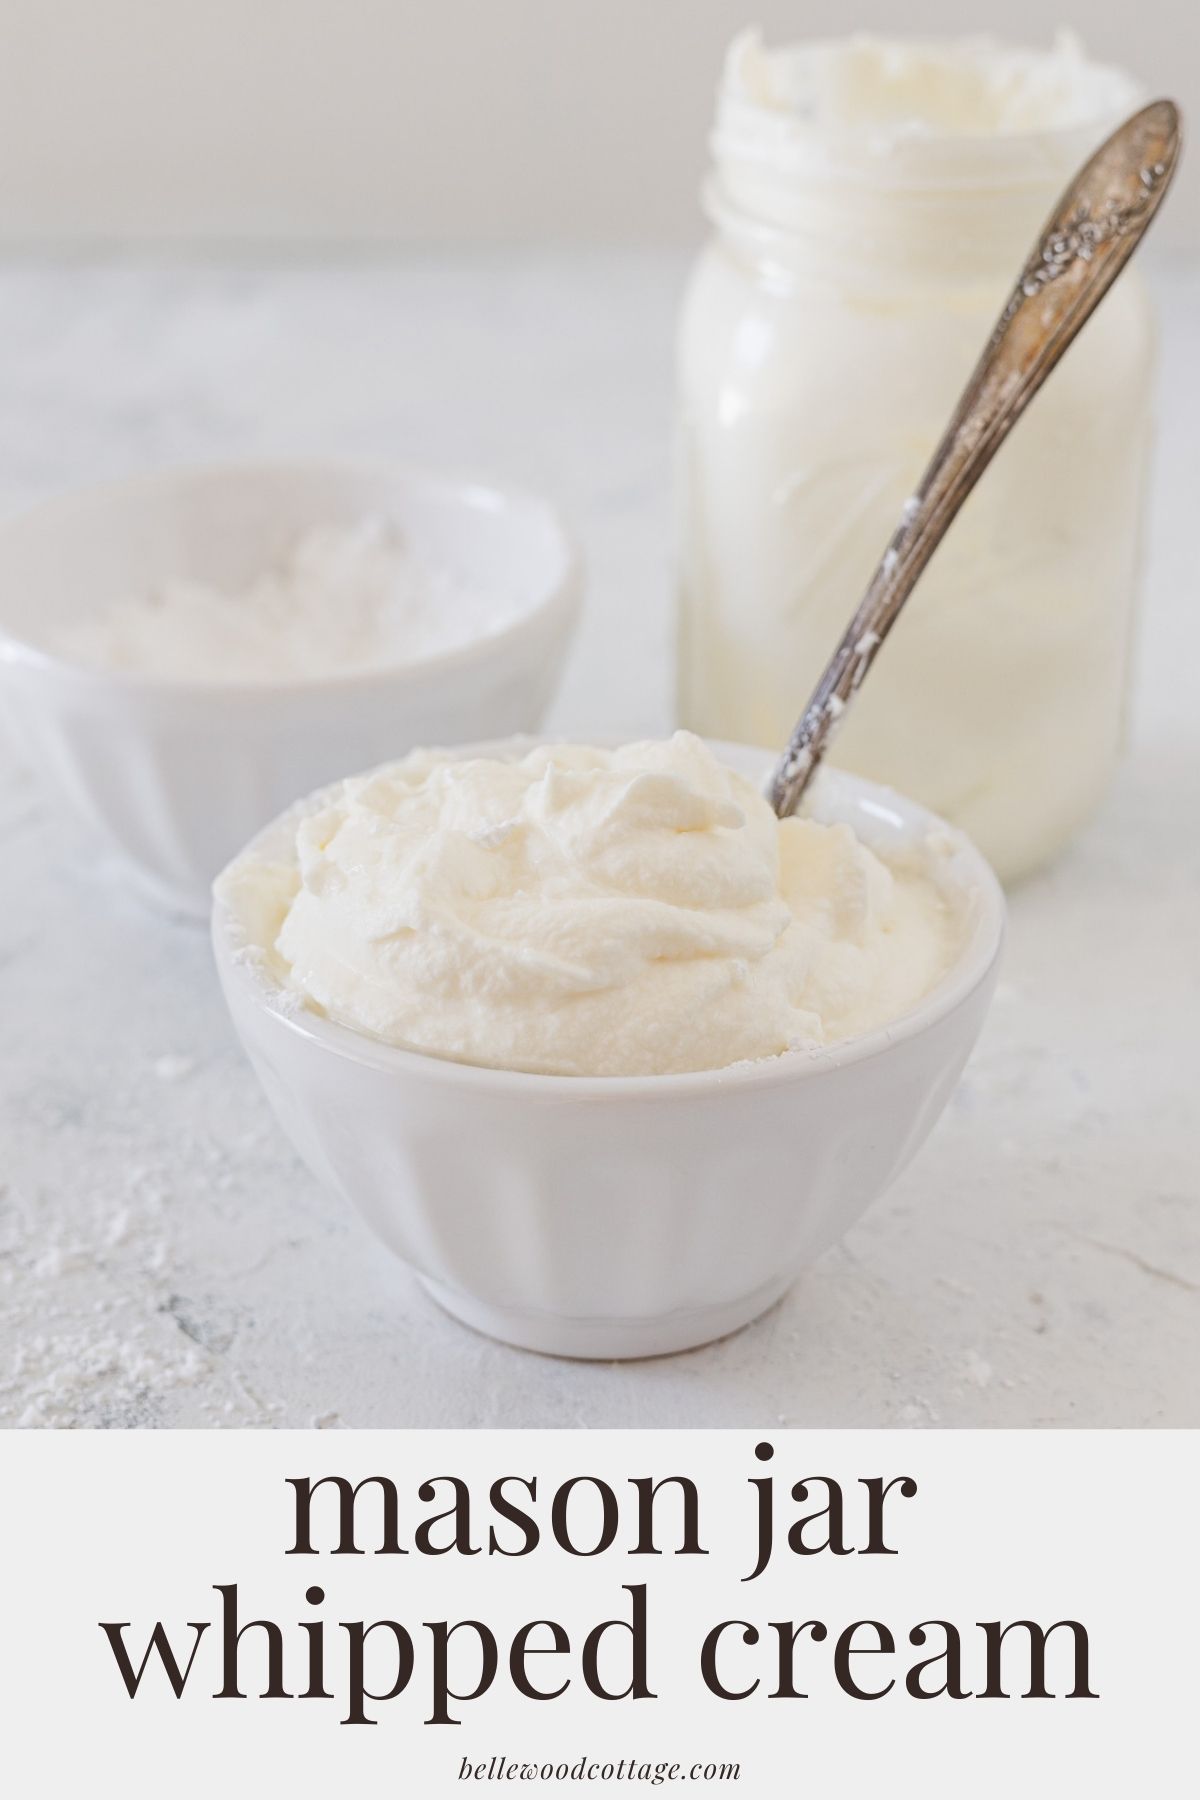 A white bowl filled with whipped cream and a spoon with the words, "mason jar whipped cream".